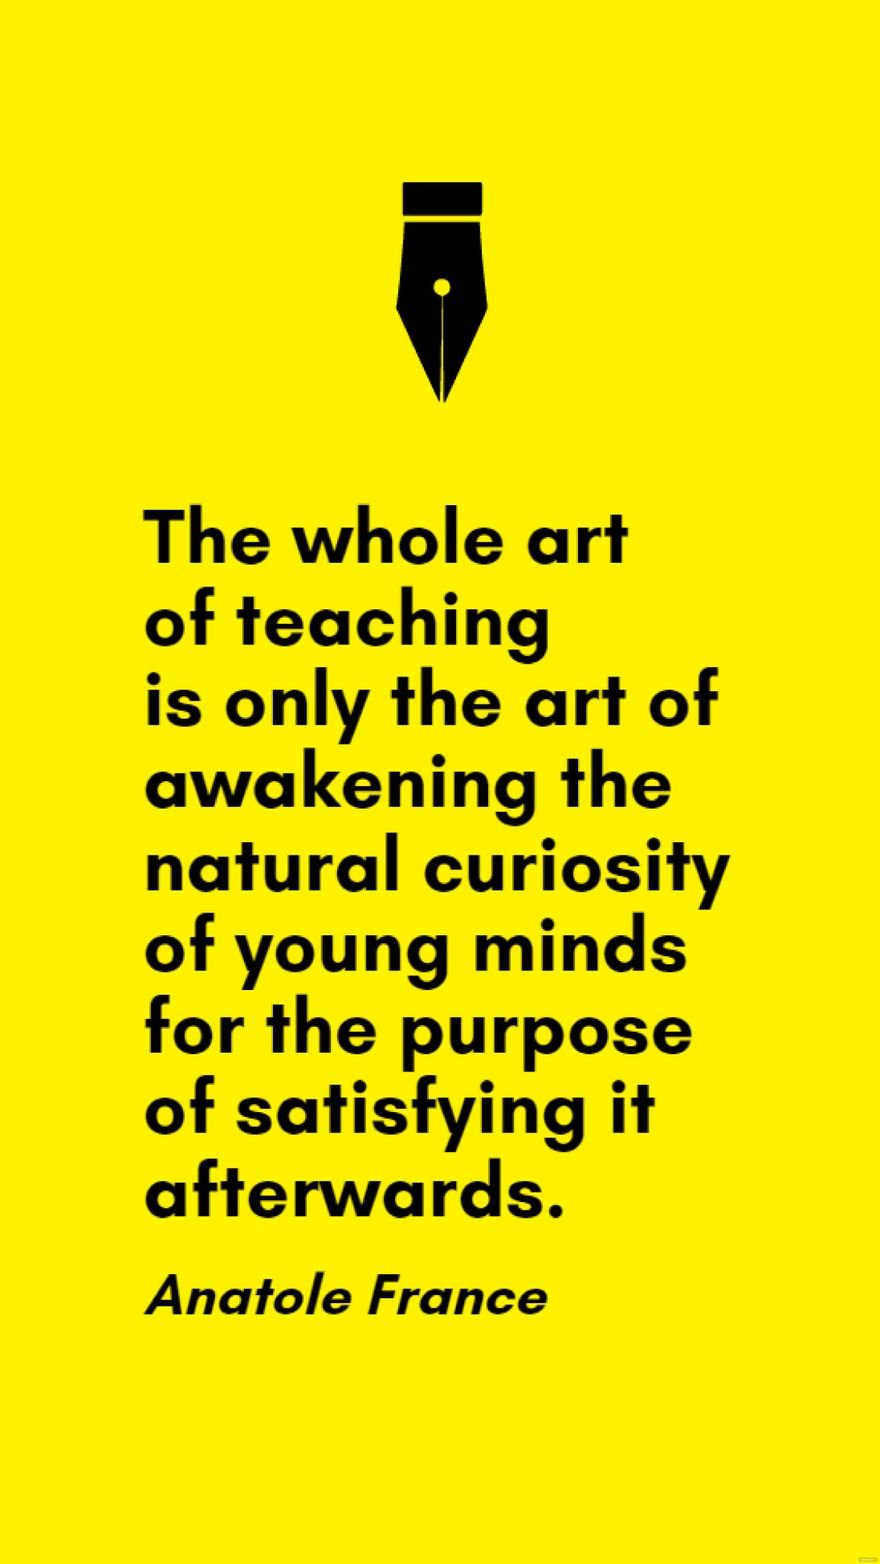 Anatole France - The whole art of teaching is only the art of awakening the natural curiosity of young minds for the purpose of satisfying it afterwards. in JPG